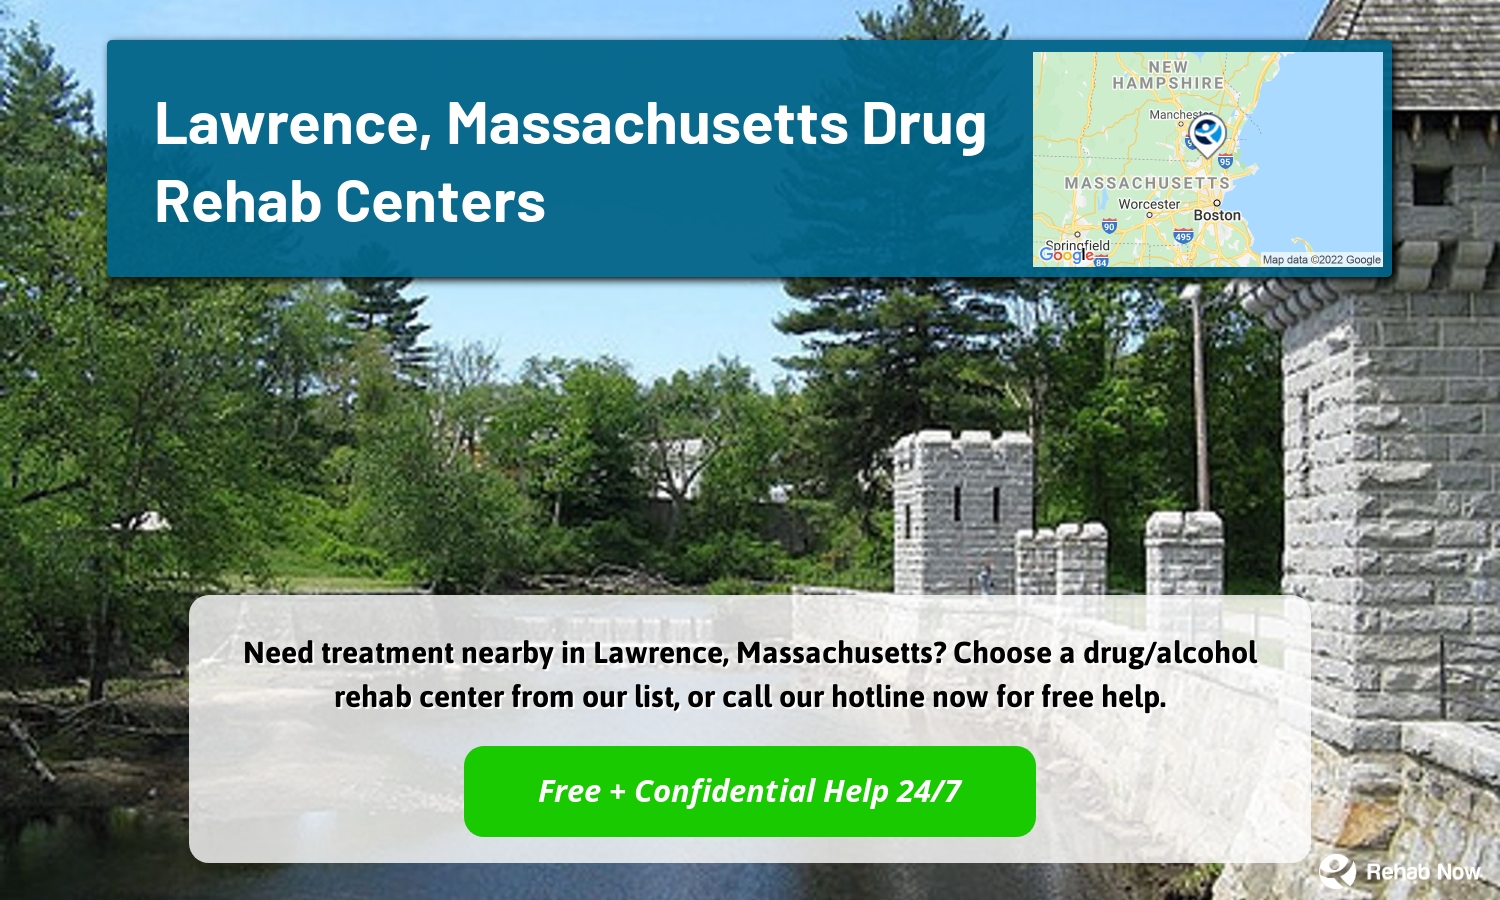 Need treatment nearby in Lawrence, Massachusetts? Choose a drug/alcohol rehab center from our list, or call our hotline now for free help.